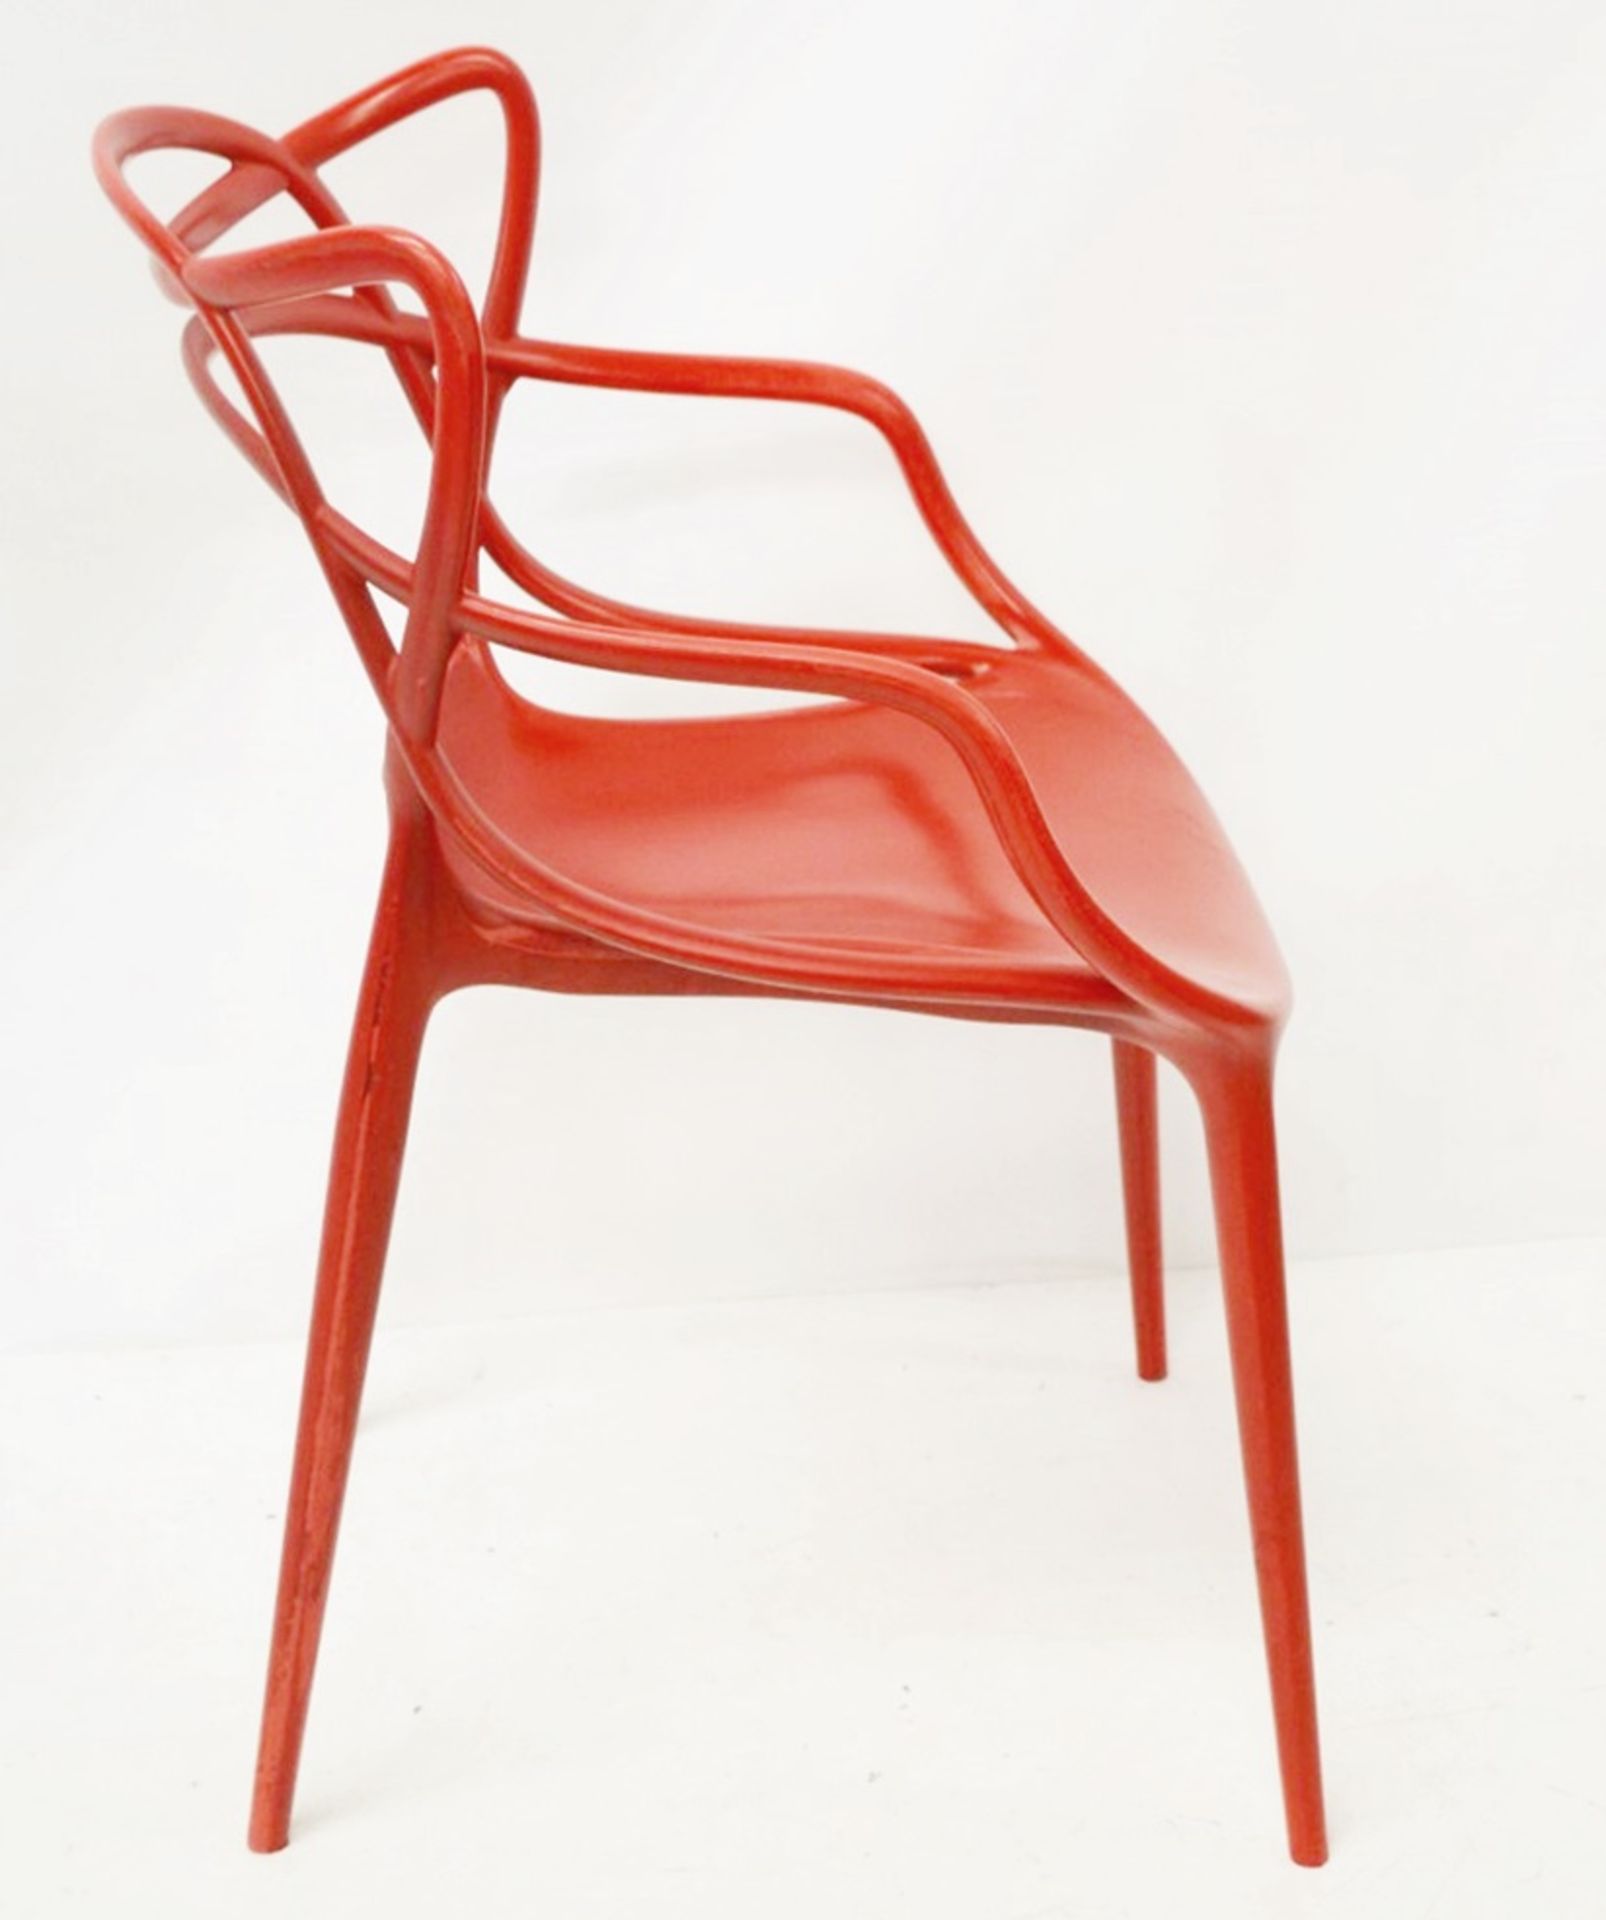 10 x Philippe Starck For Kartell 'Masters' Designer Red Gloss Bistro Chairs - Made In Italy - Used - Image 5 of 9